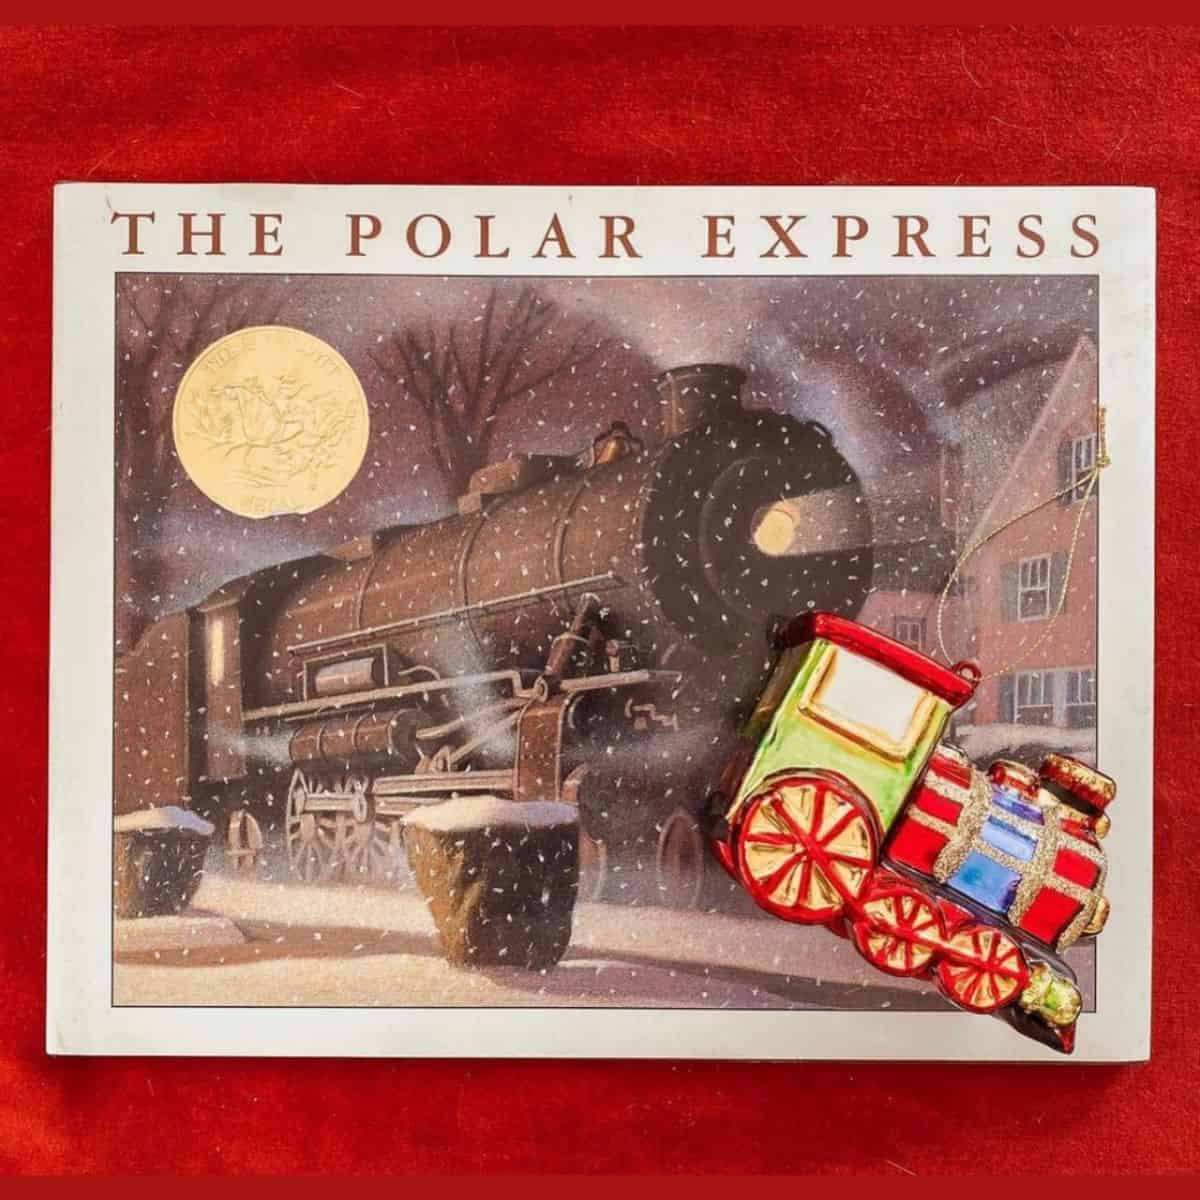 the polar express by chris van allsburg with train ornament.